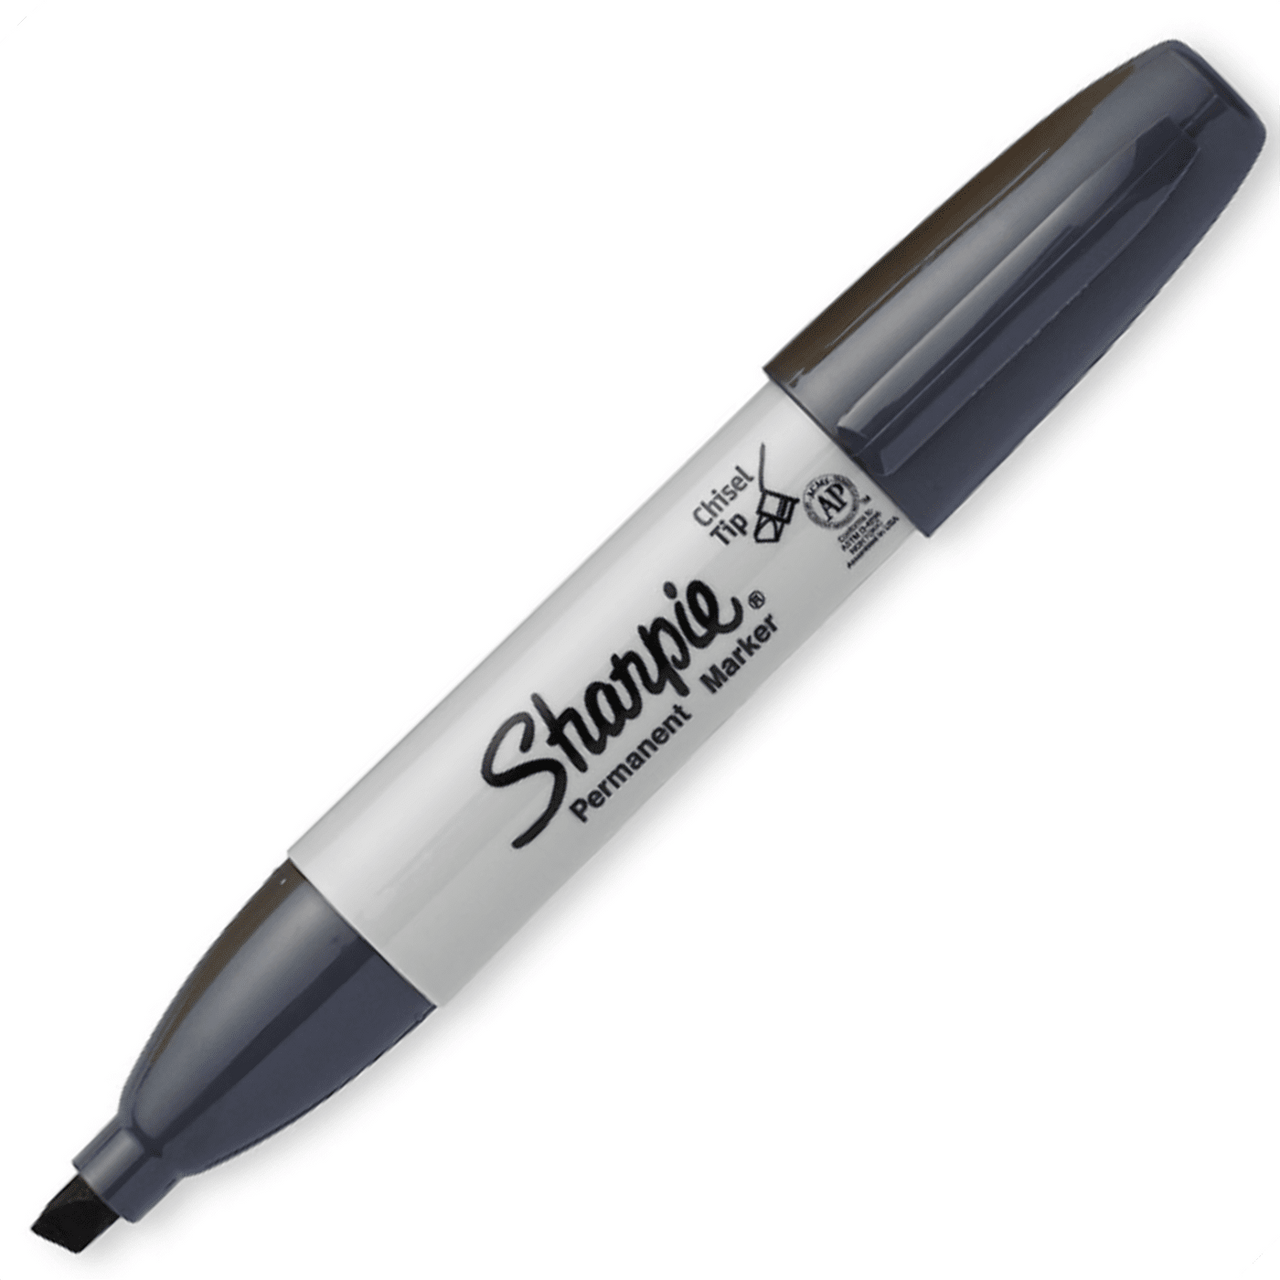 Sharpie Brush Tip Markers Berry Pack of 3 